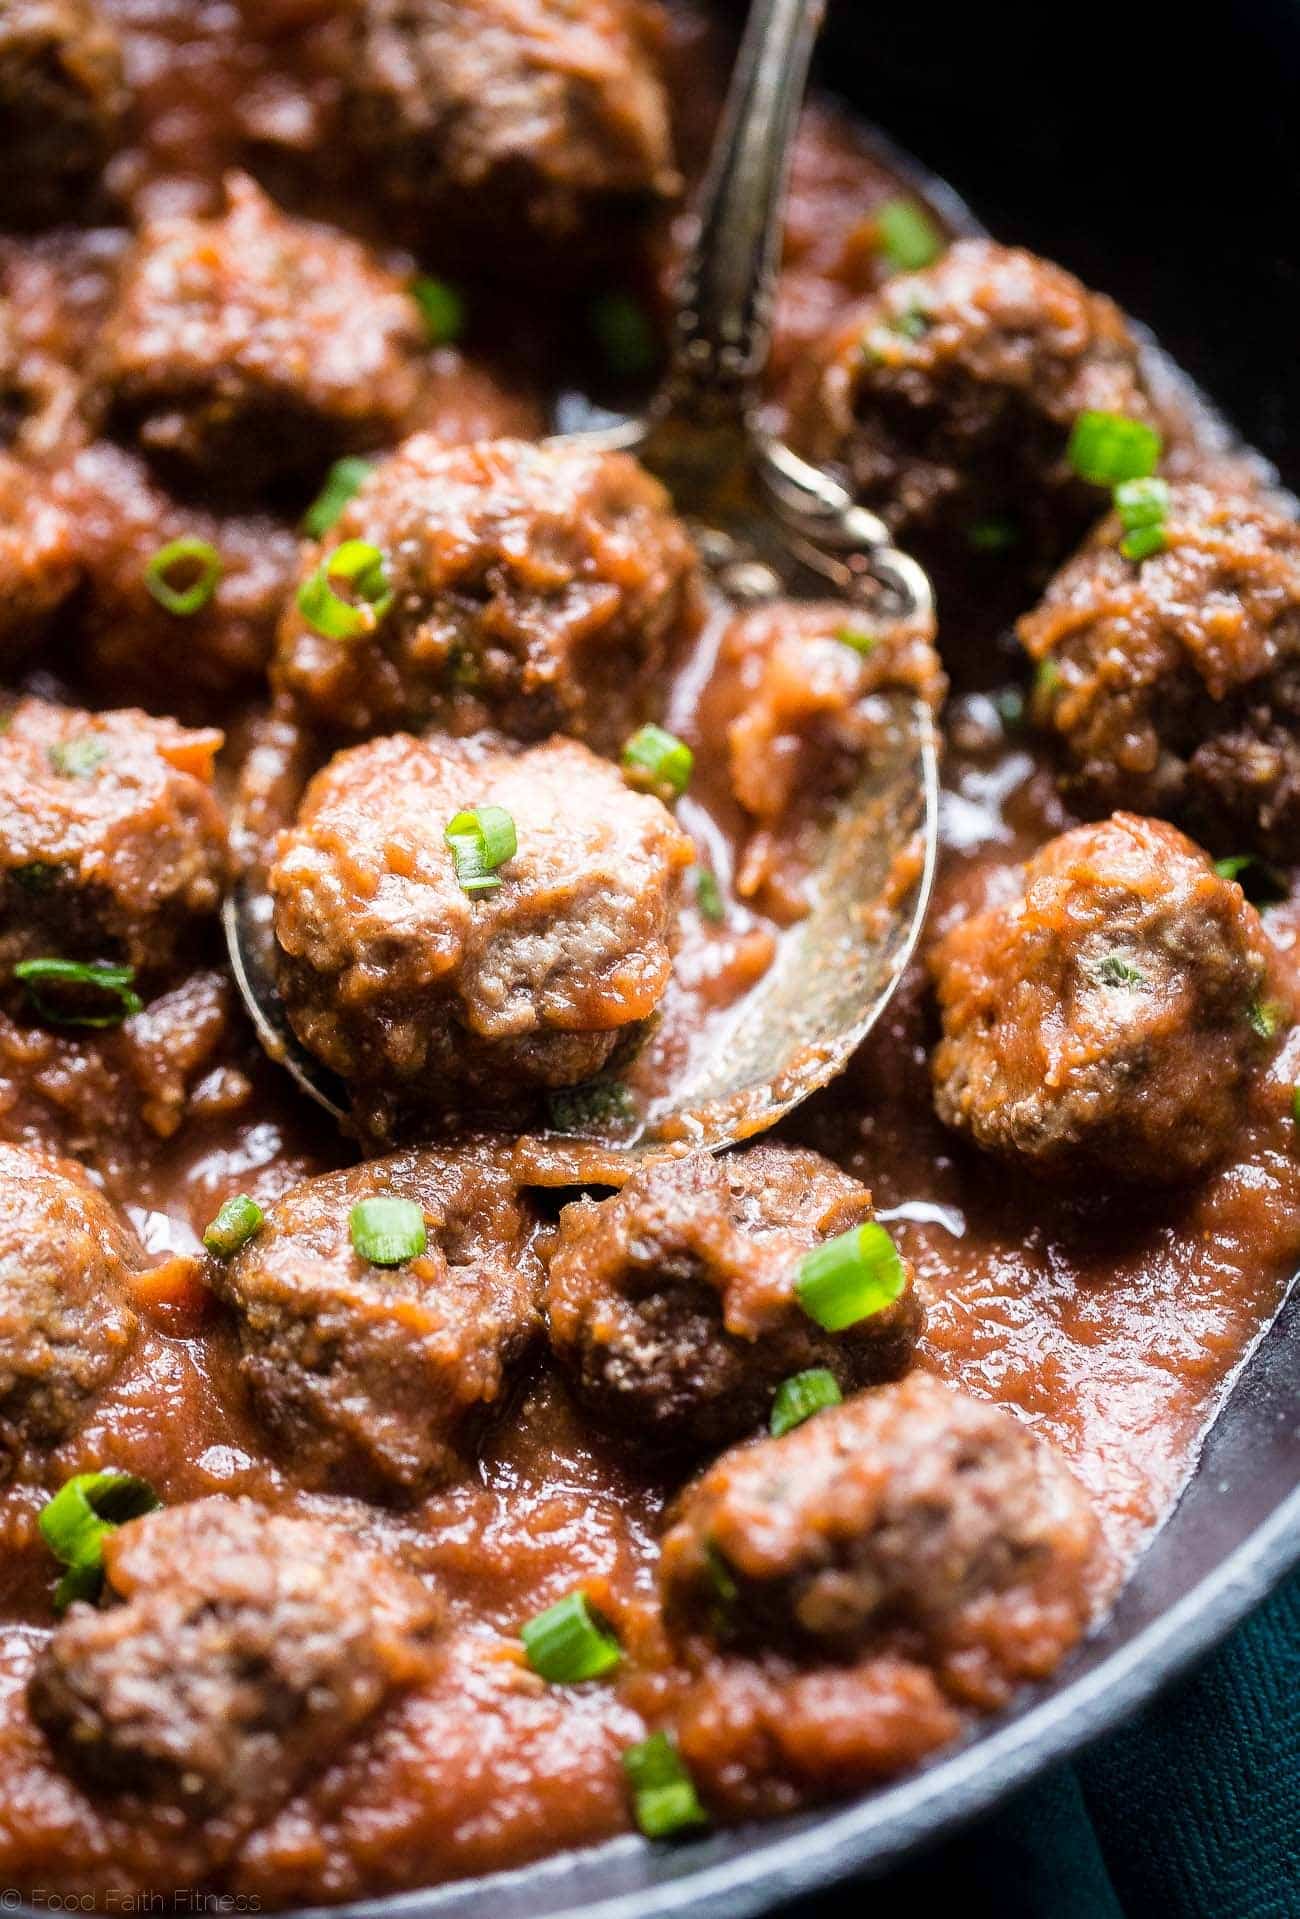 Whole30 Sweet and Sour Meatballs - These easy dairy free meatballs are a healthy remake of a classic recipe that is gluten free and whole30 complaint! They're a weeknight meal that everyone will love! | Foodfaithfitness.com | @FoodFaithFit